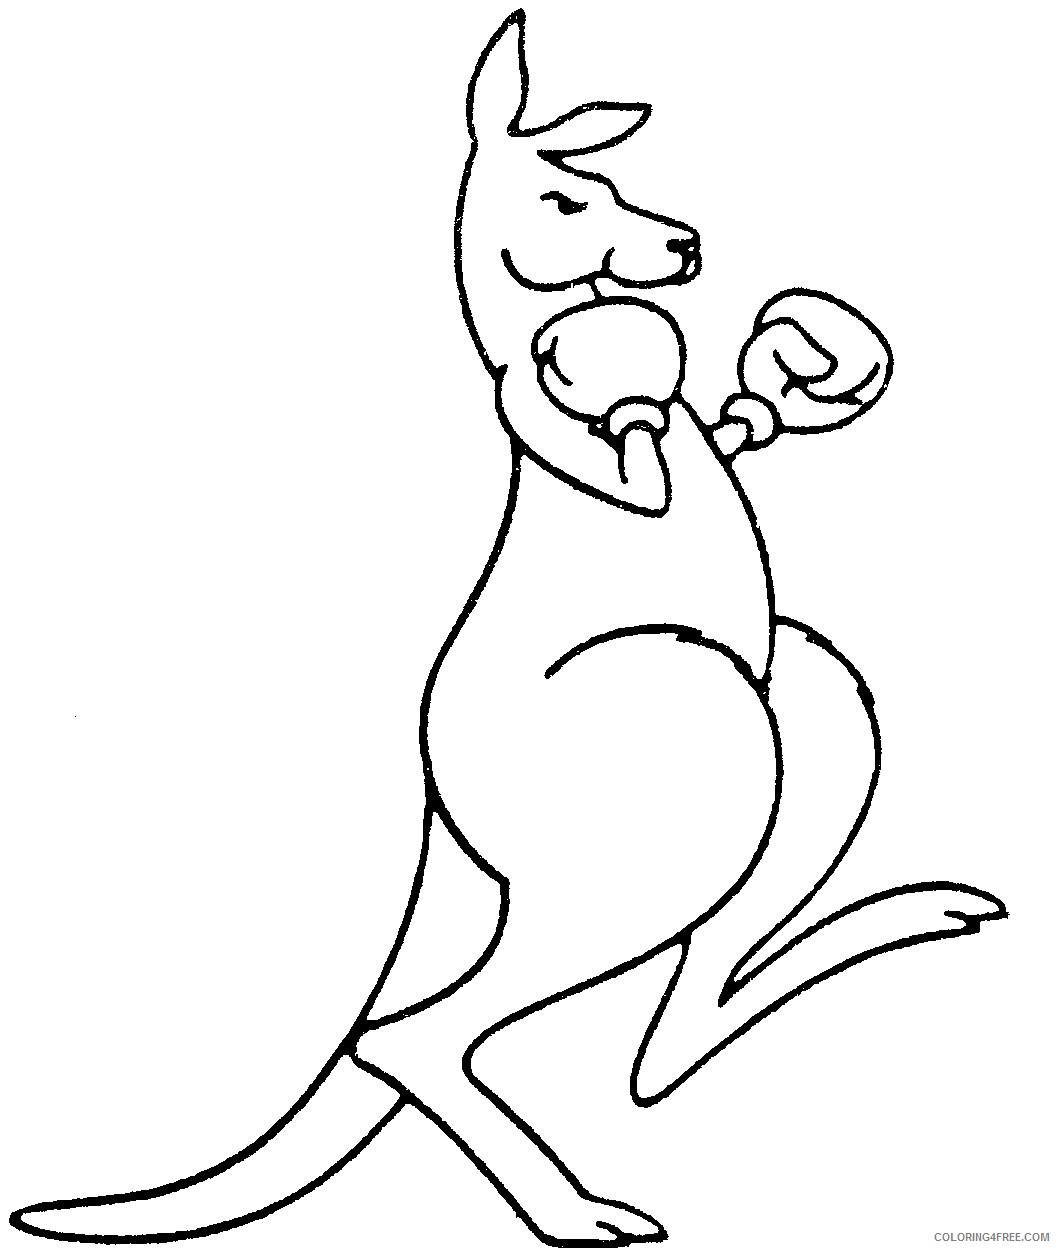 kangaroo coloring pages with boxing gloves Coloring4free